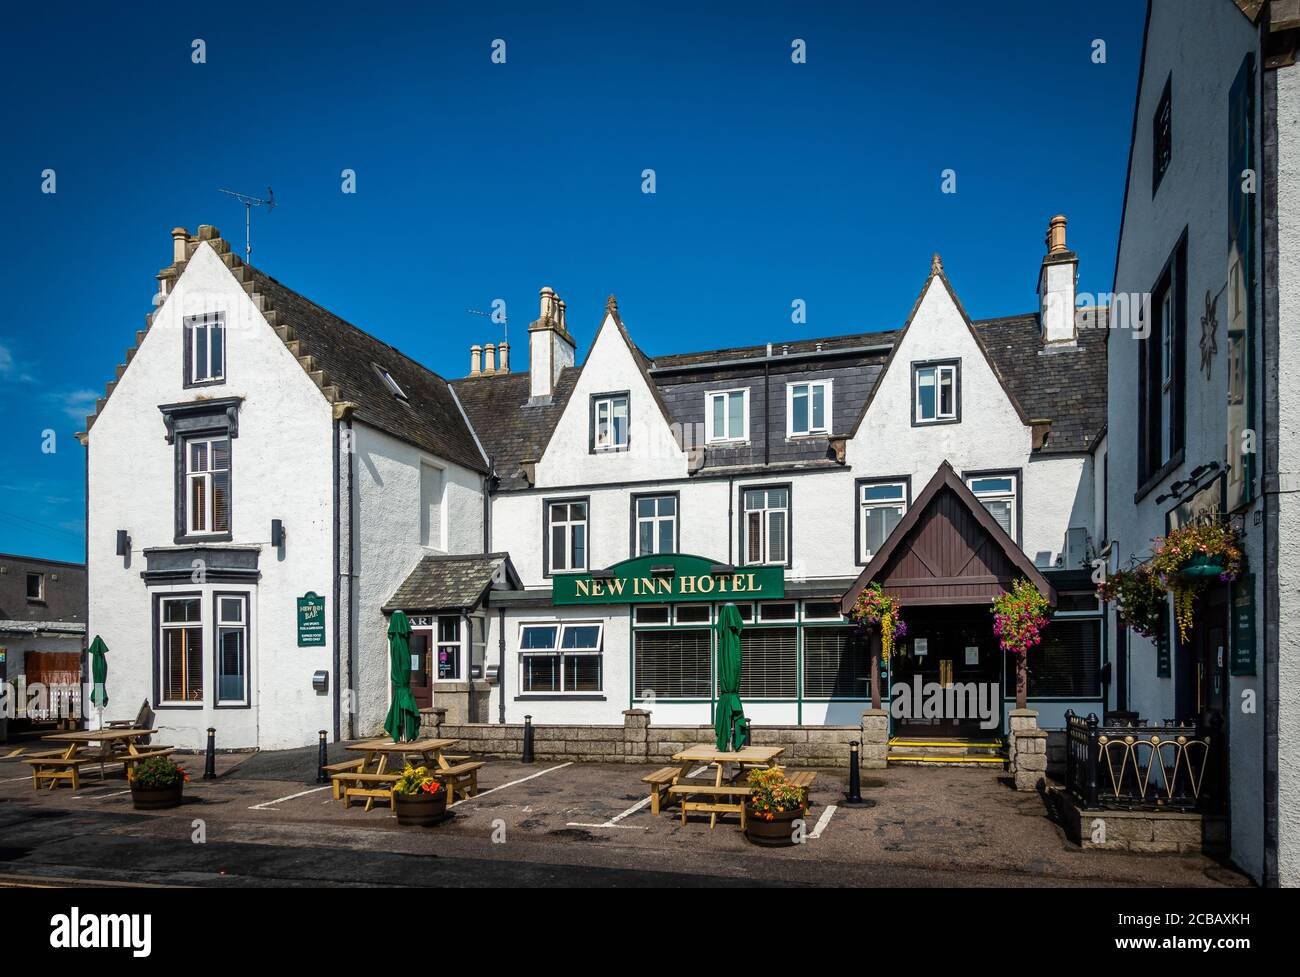 The New Inn Hotel in the town of Ellon, lying on the River Ythan in Aberdeenshire, Scotland, UK Stock Photo